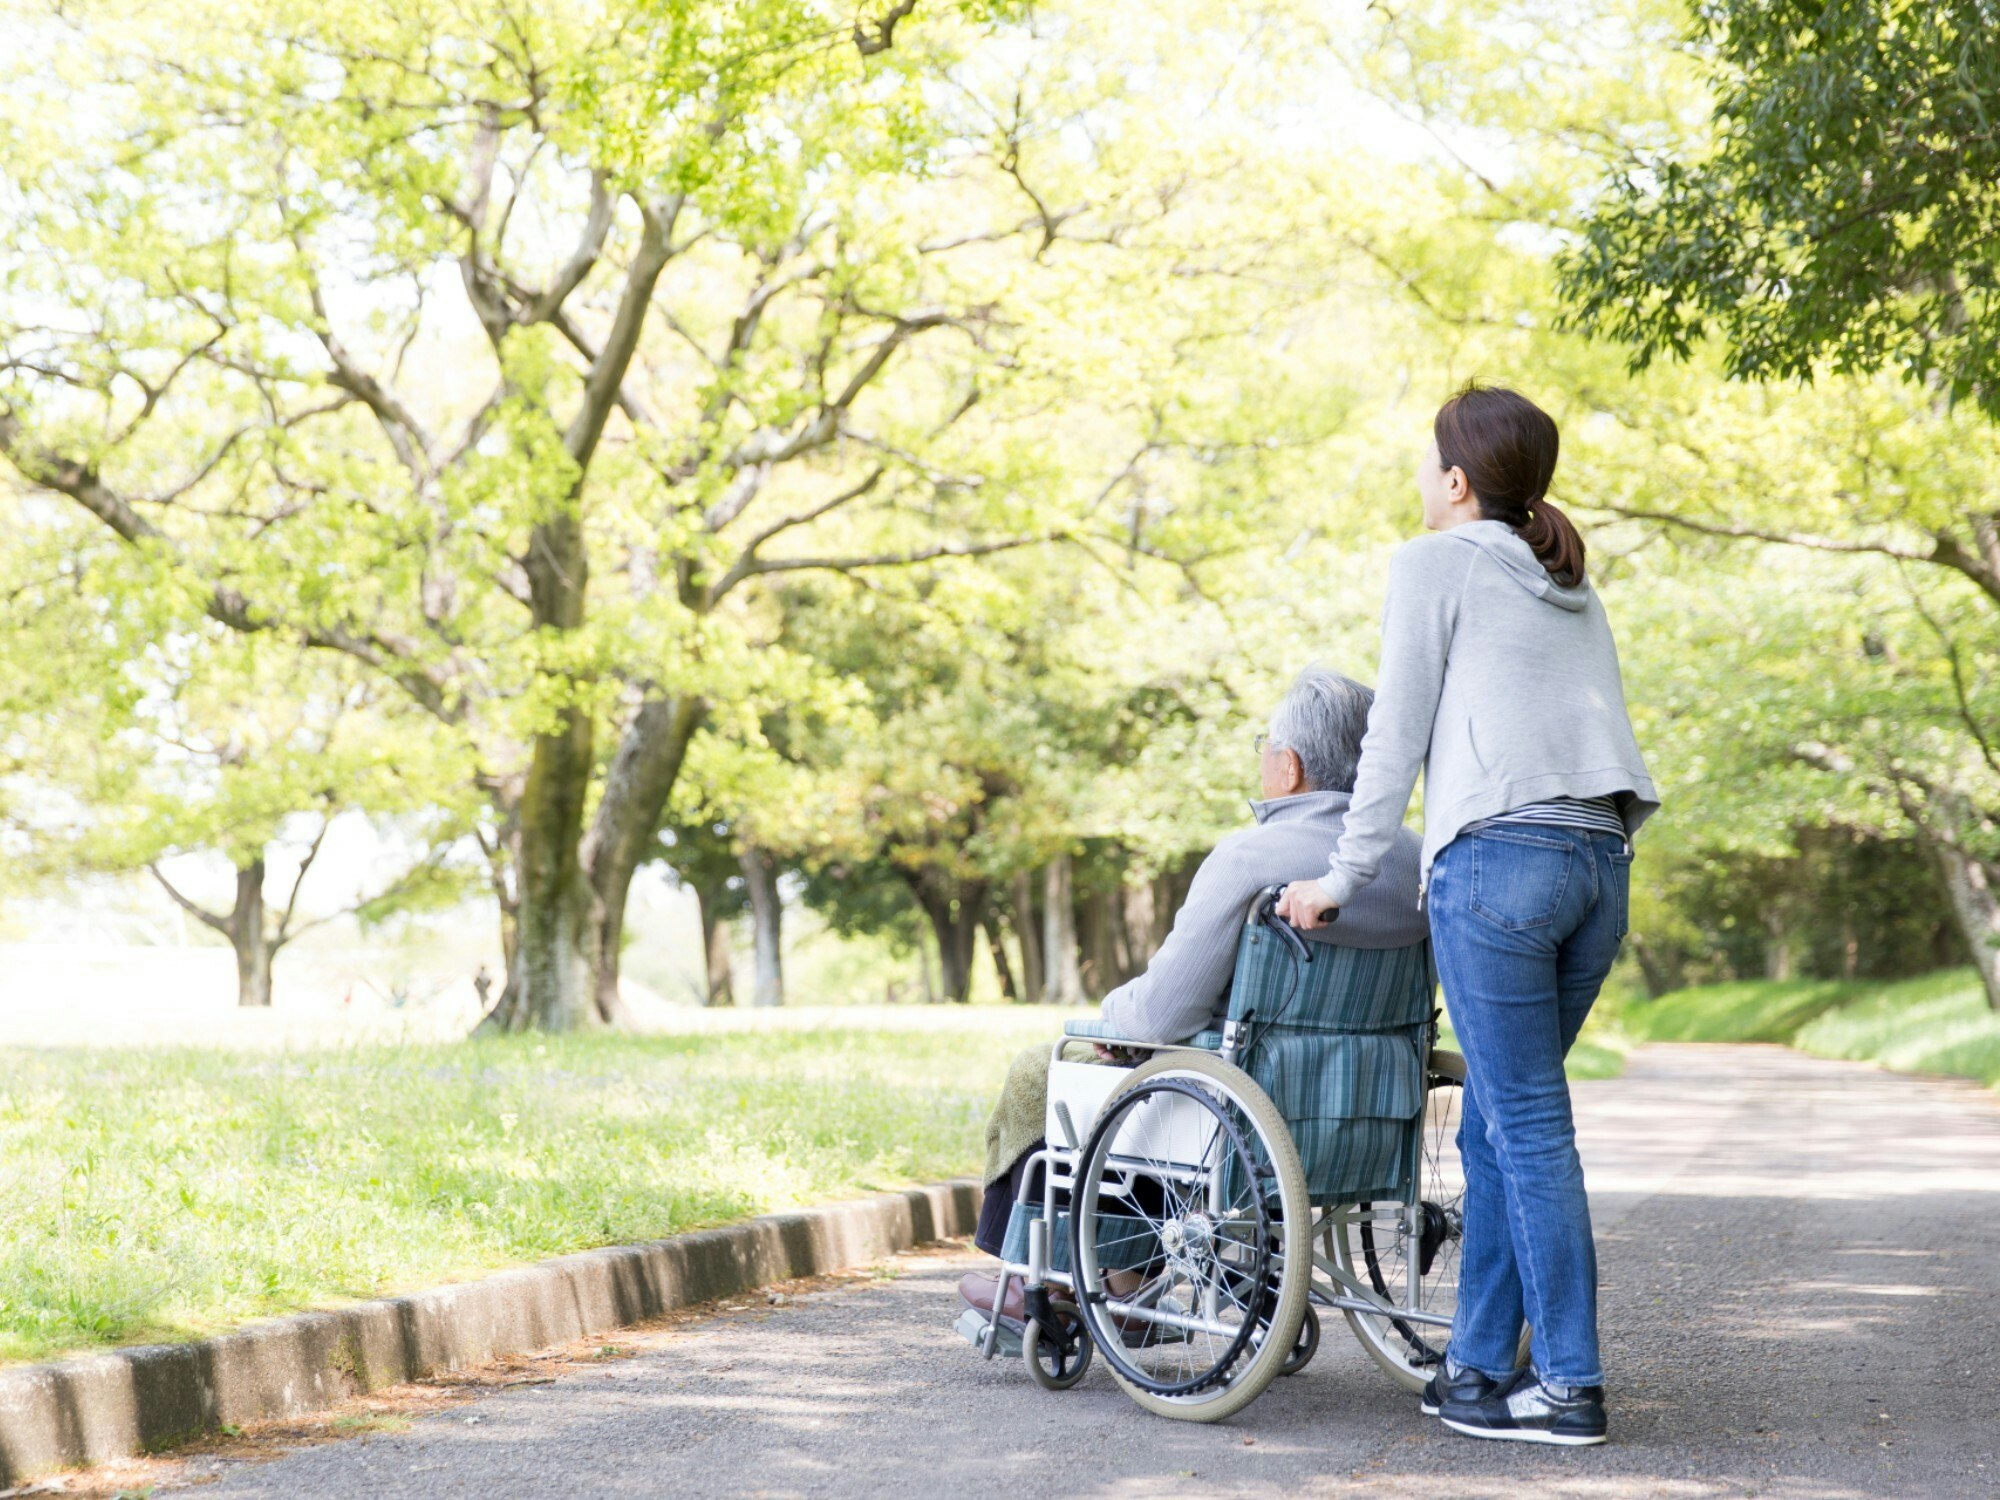 <p>At the end of September last year there were 3,676 Australians under 65 years old living in permanent residential aged care. [Source: Shutterstock]</p>
